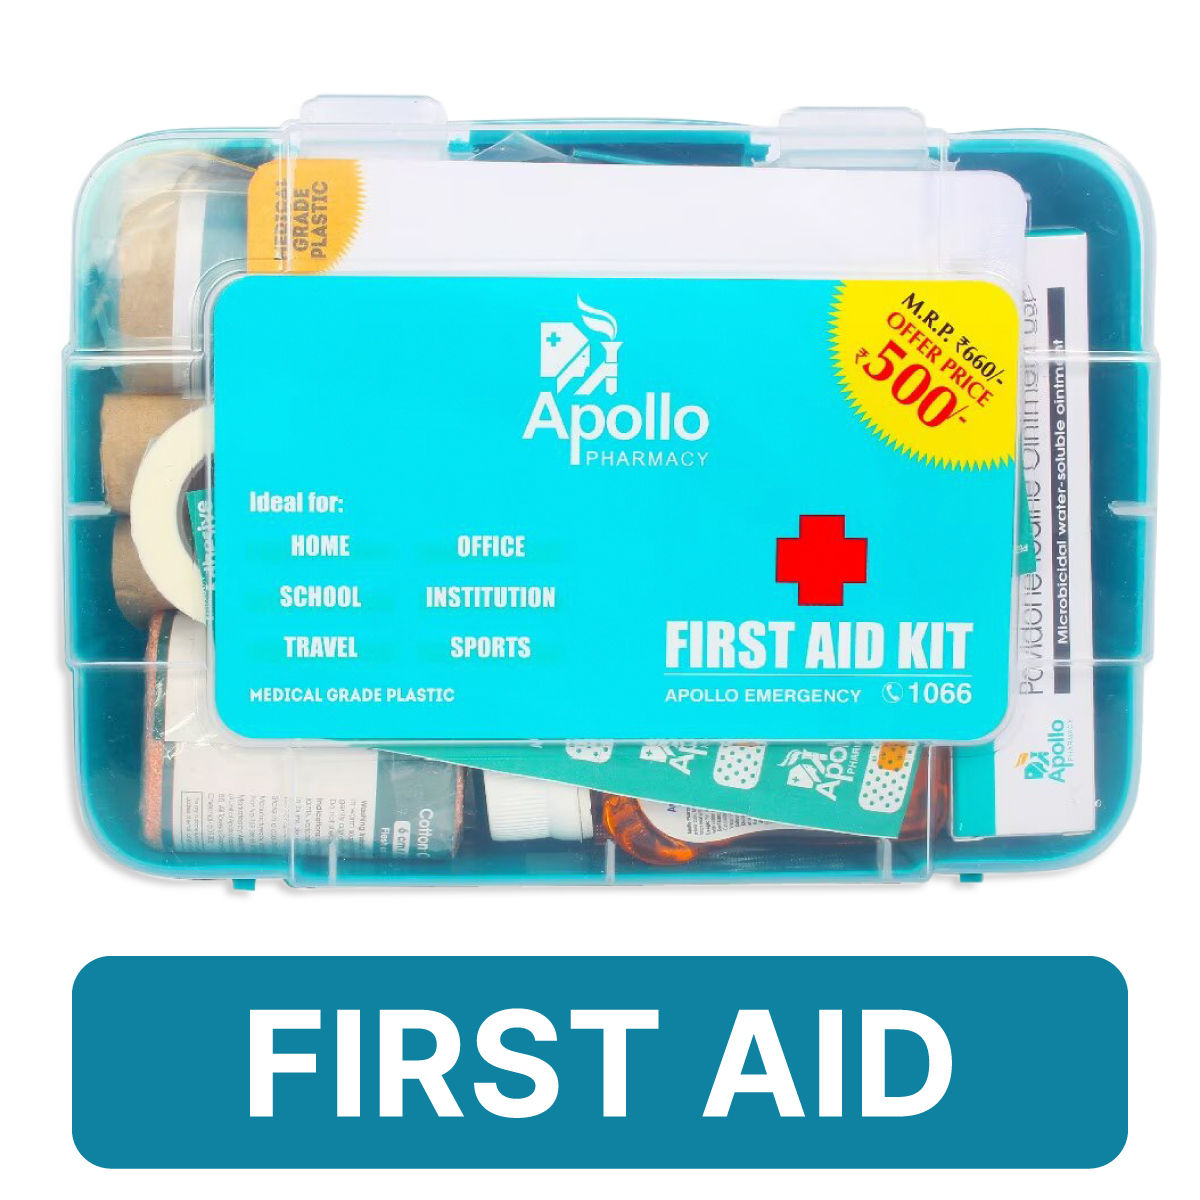 Apollo Pharmacy First Aid Kit, 1 Count, Pack of 1 